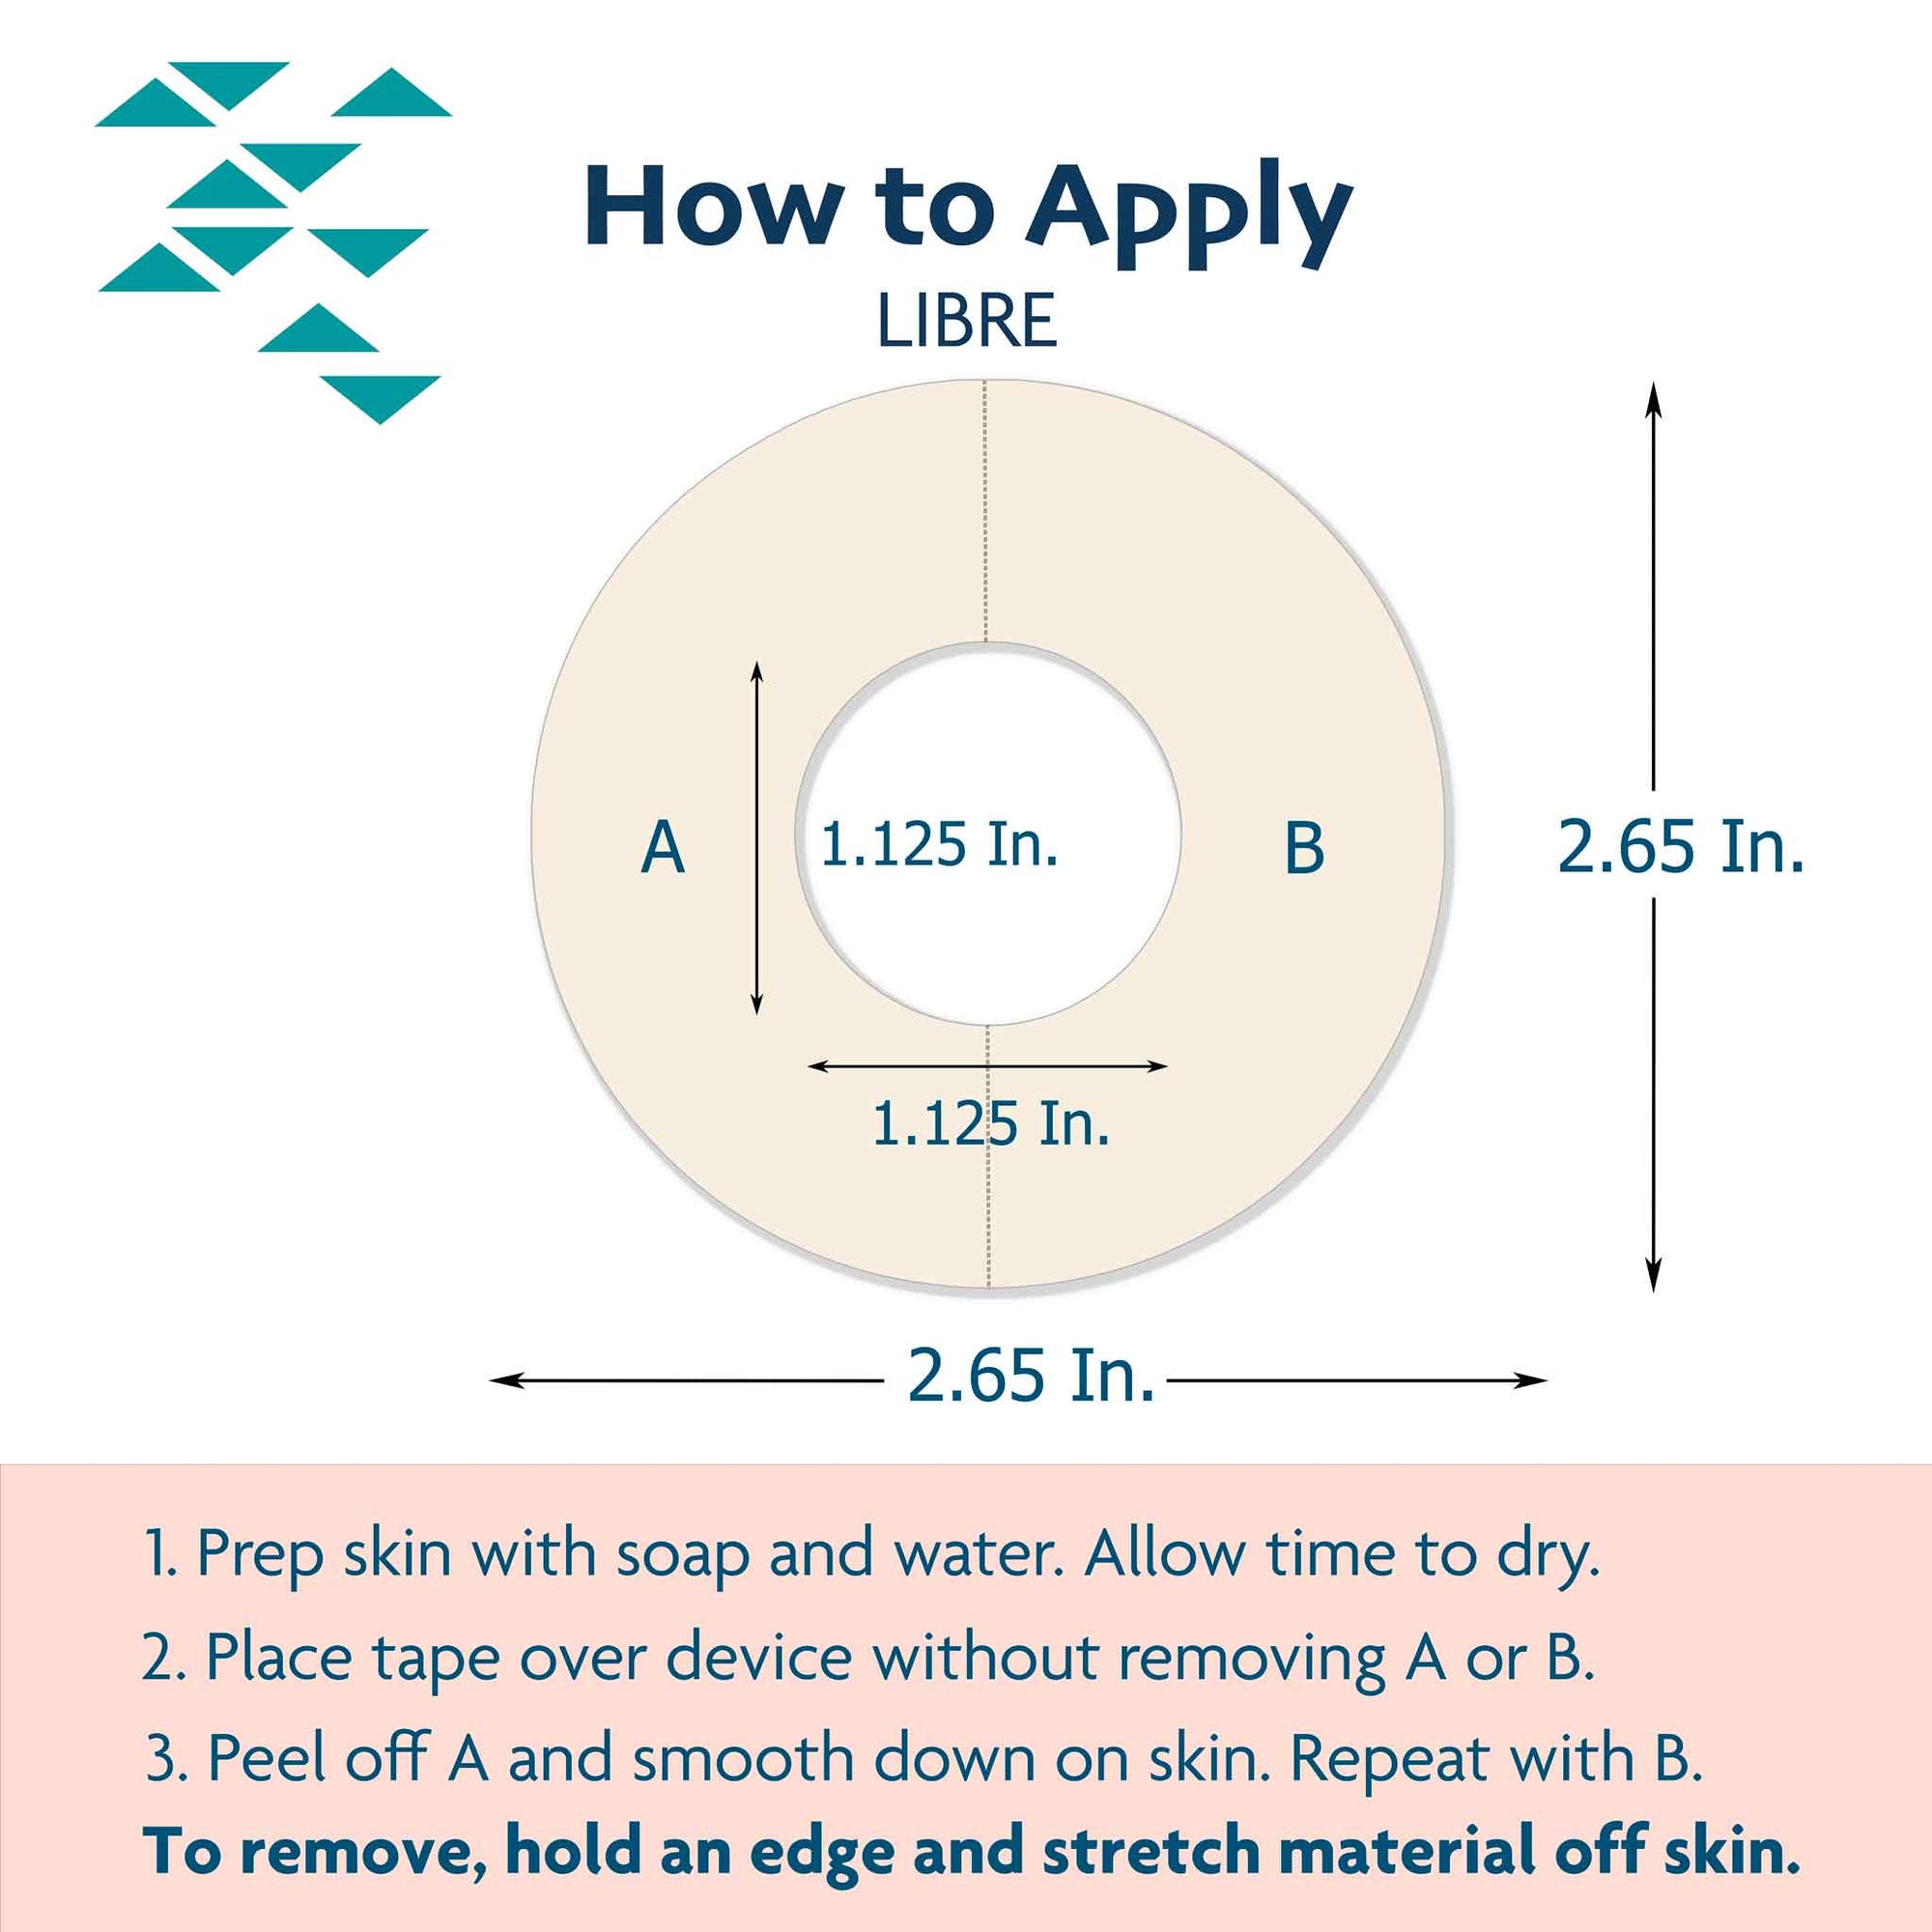 ExpressionMed Libre Patch application instructions to secure your CGM Properly